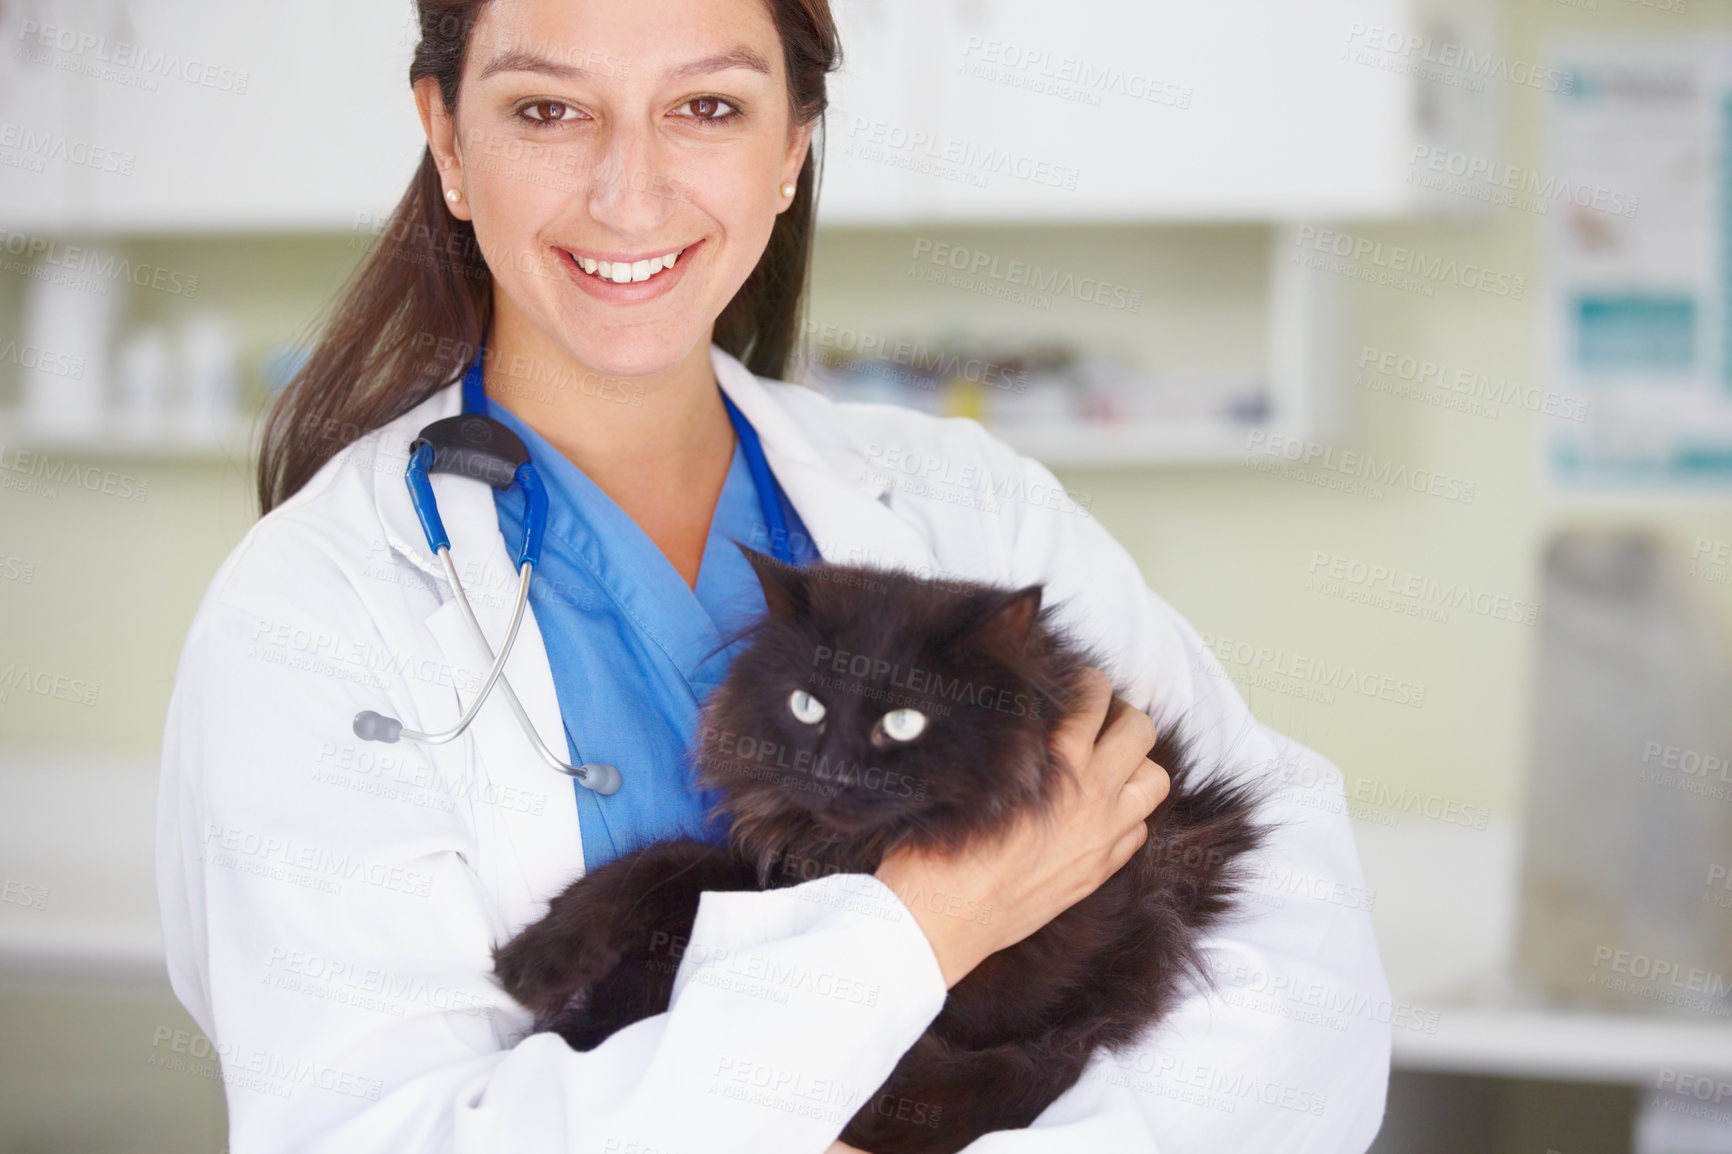 Buy stock photo Vet portrait, cat and woman happiness for medical help, wellness healing services or healthcare support. Animal care kindness, veterinary job experience or hospital veterinarian smile with feline